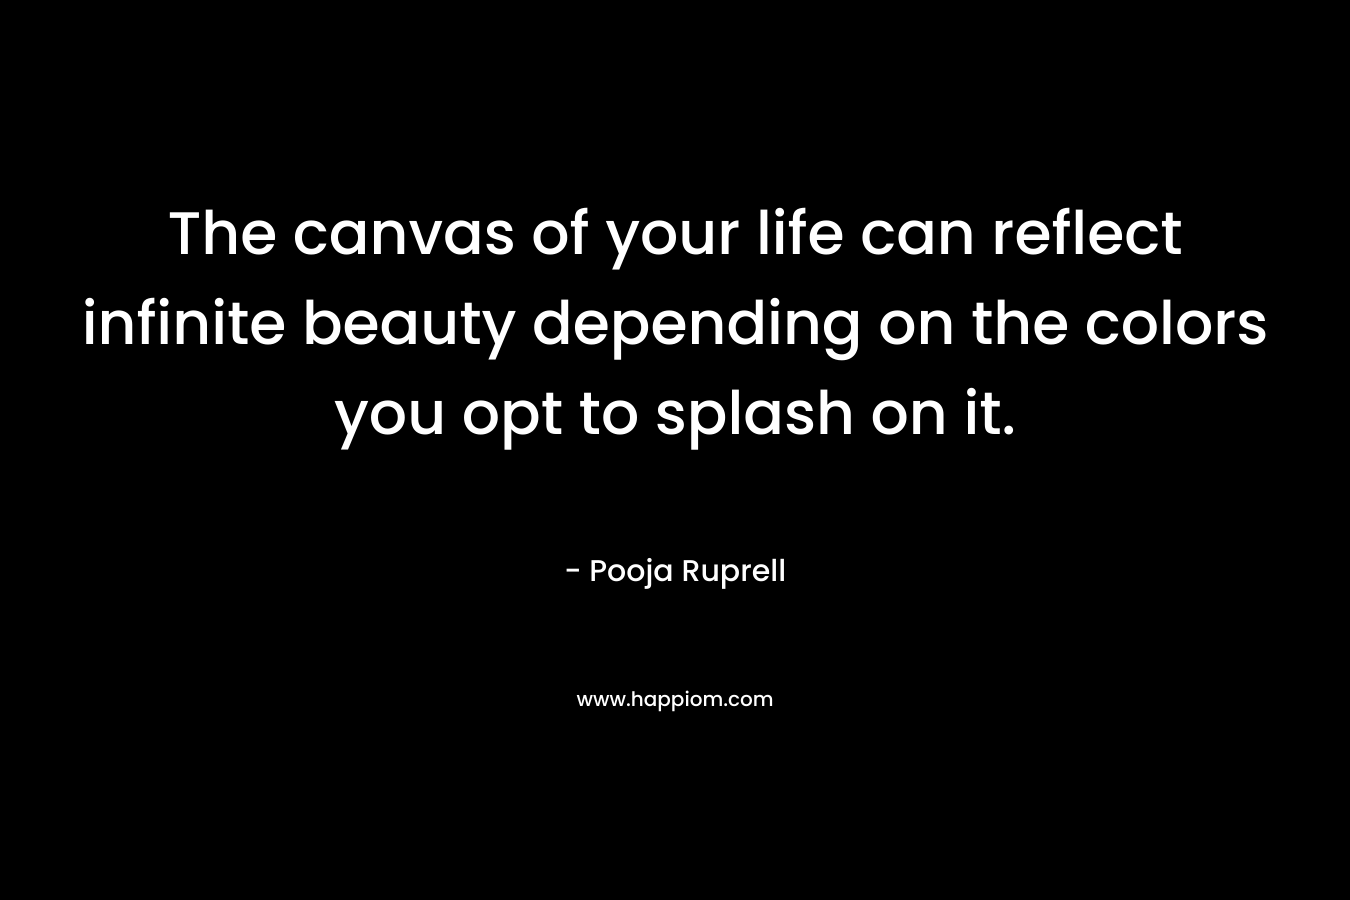 The canvas of your life can reflect infinite beauty depending on the colors you opt to splash on it.